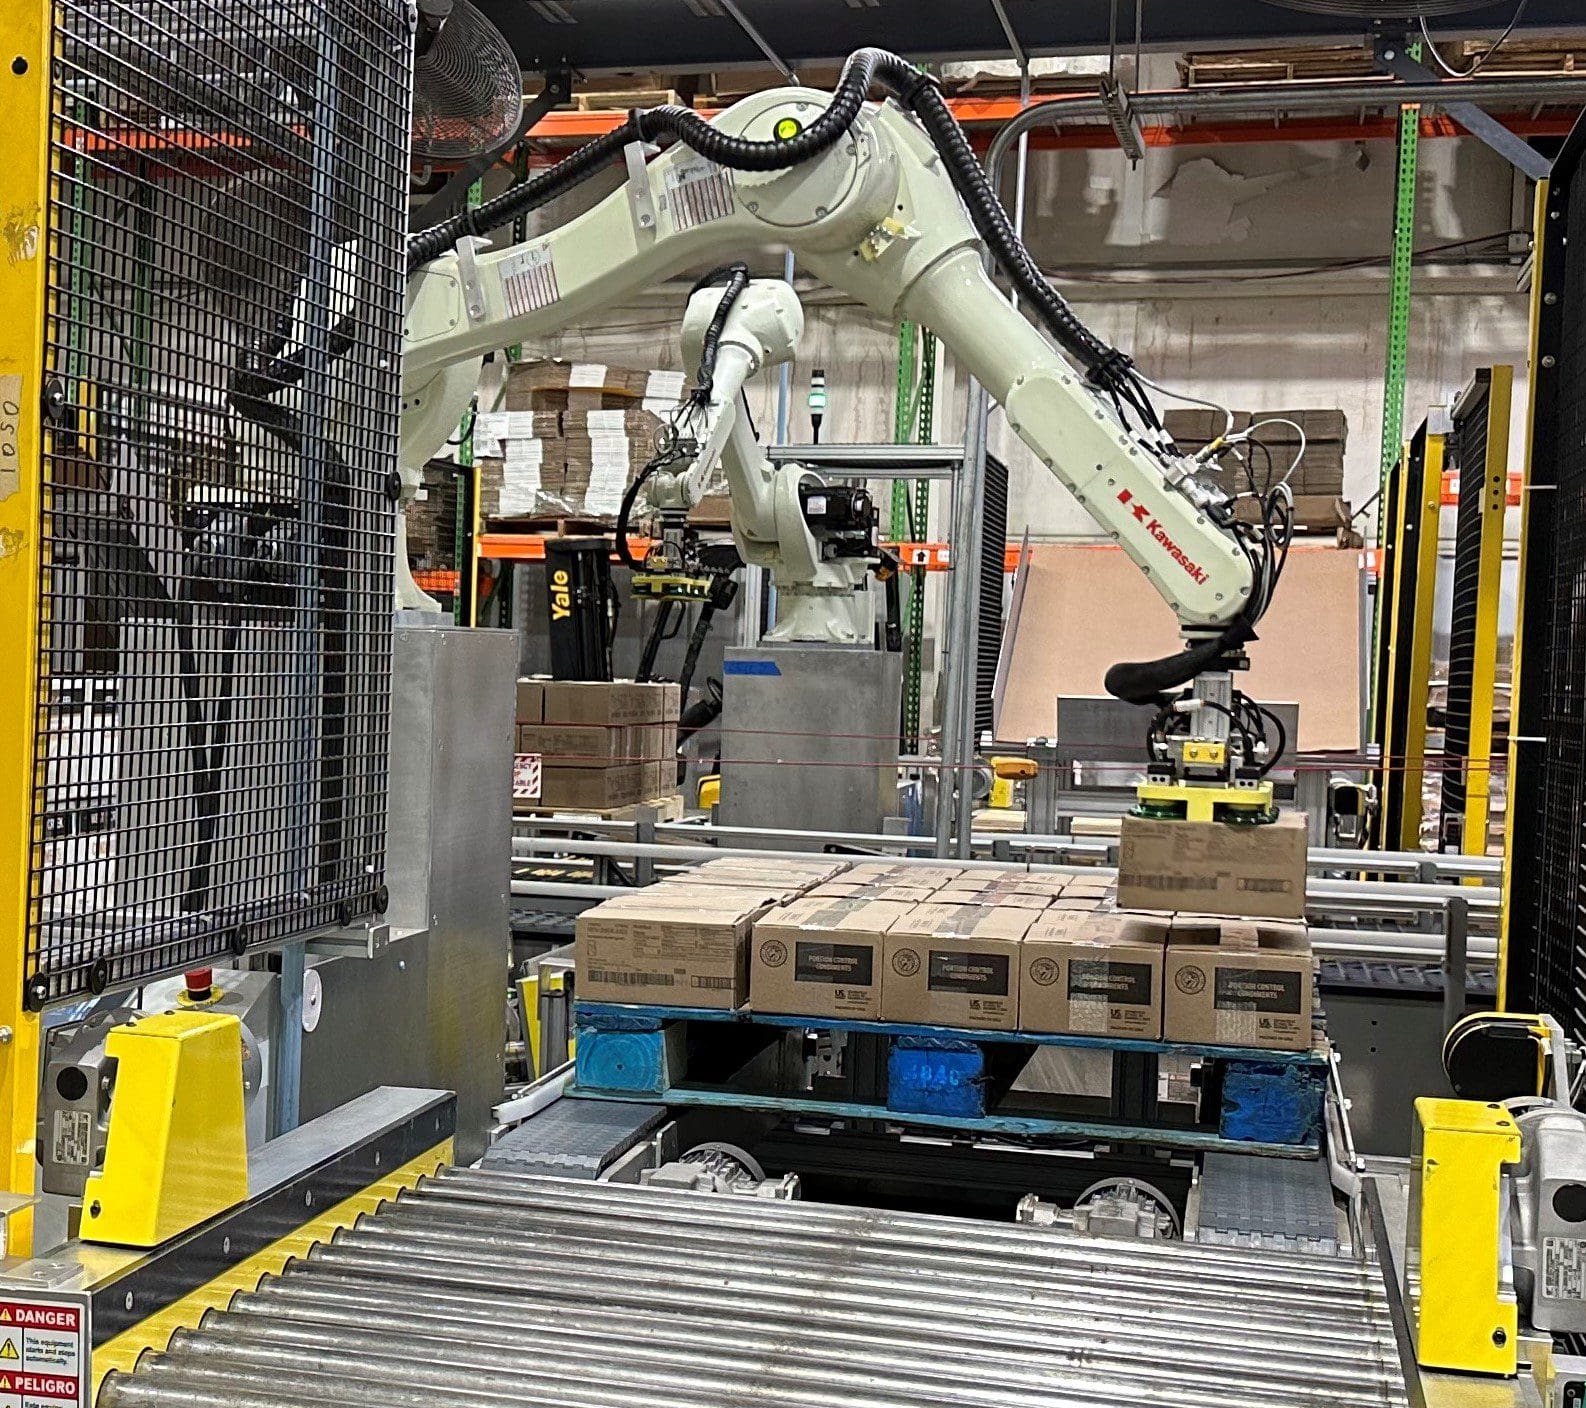 Robotic and Palletizing Examples